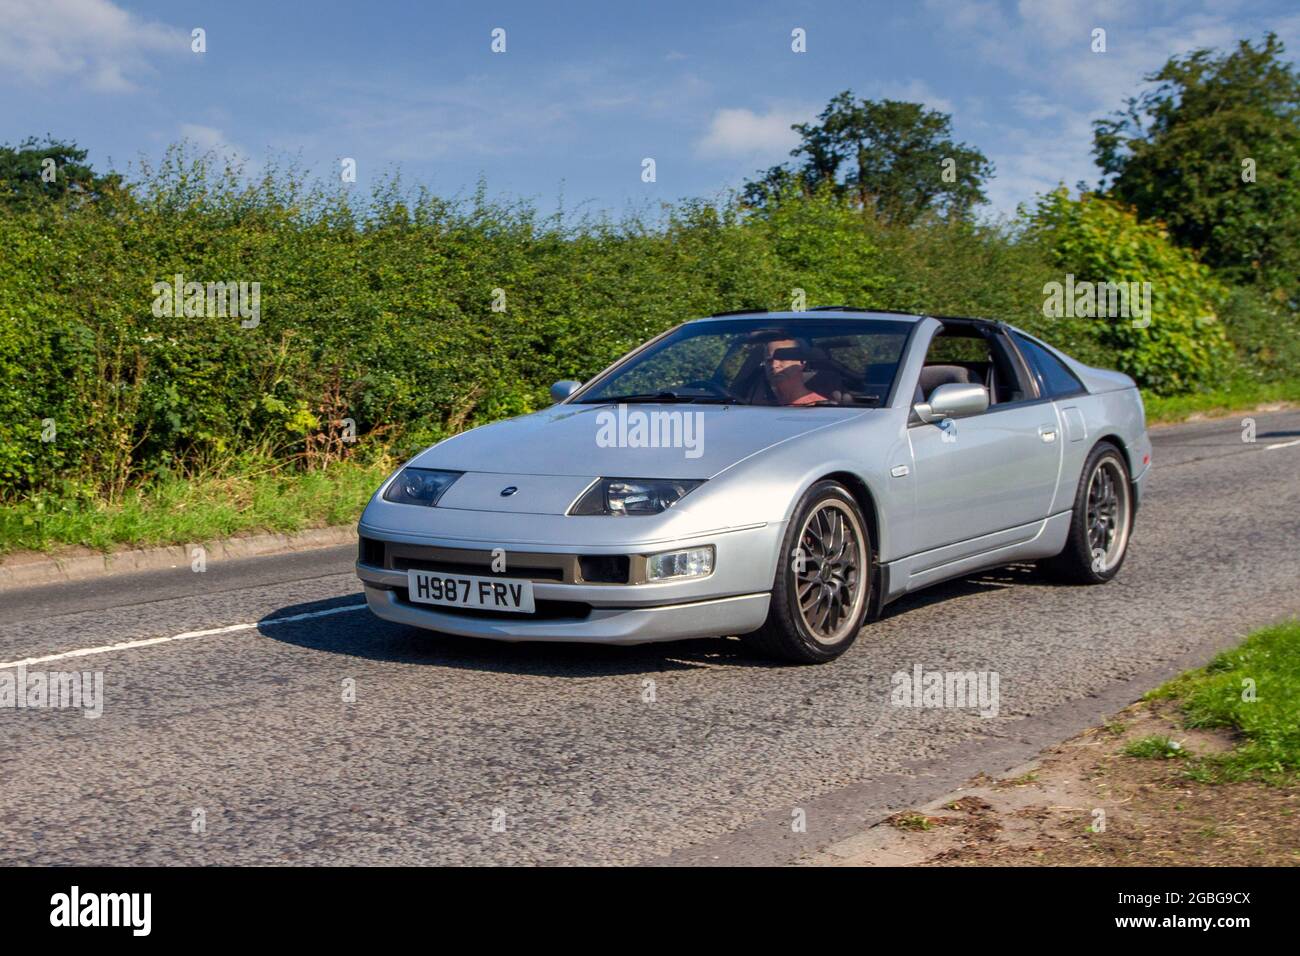 1991 90s silver Nissan 300 ZX 2960cc petrol Nissan 2dr coupe en-route to Capesthorne Hall classic July car show, Cheshire, UK Stock Photo